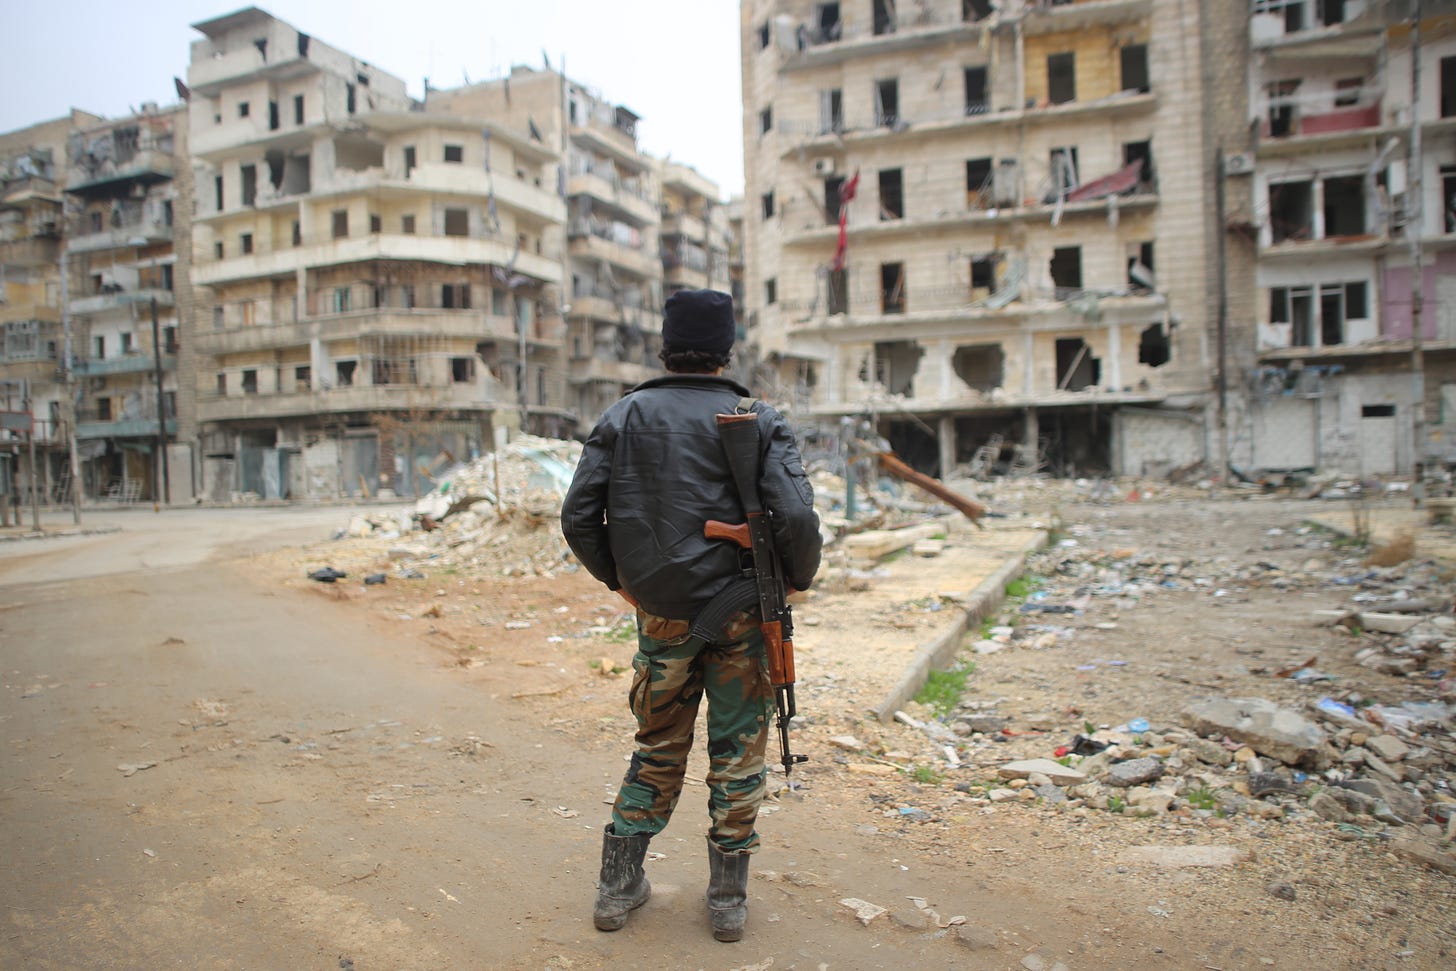 A 15-year-old former child soldier in Aleppo. (Photo by Ibrahim Khader/Pacific Press/LightRocket via Getty Images.)